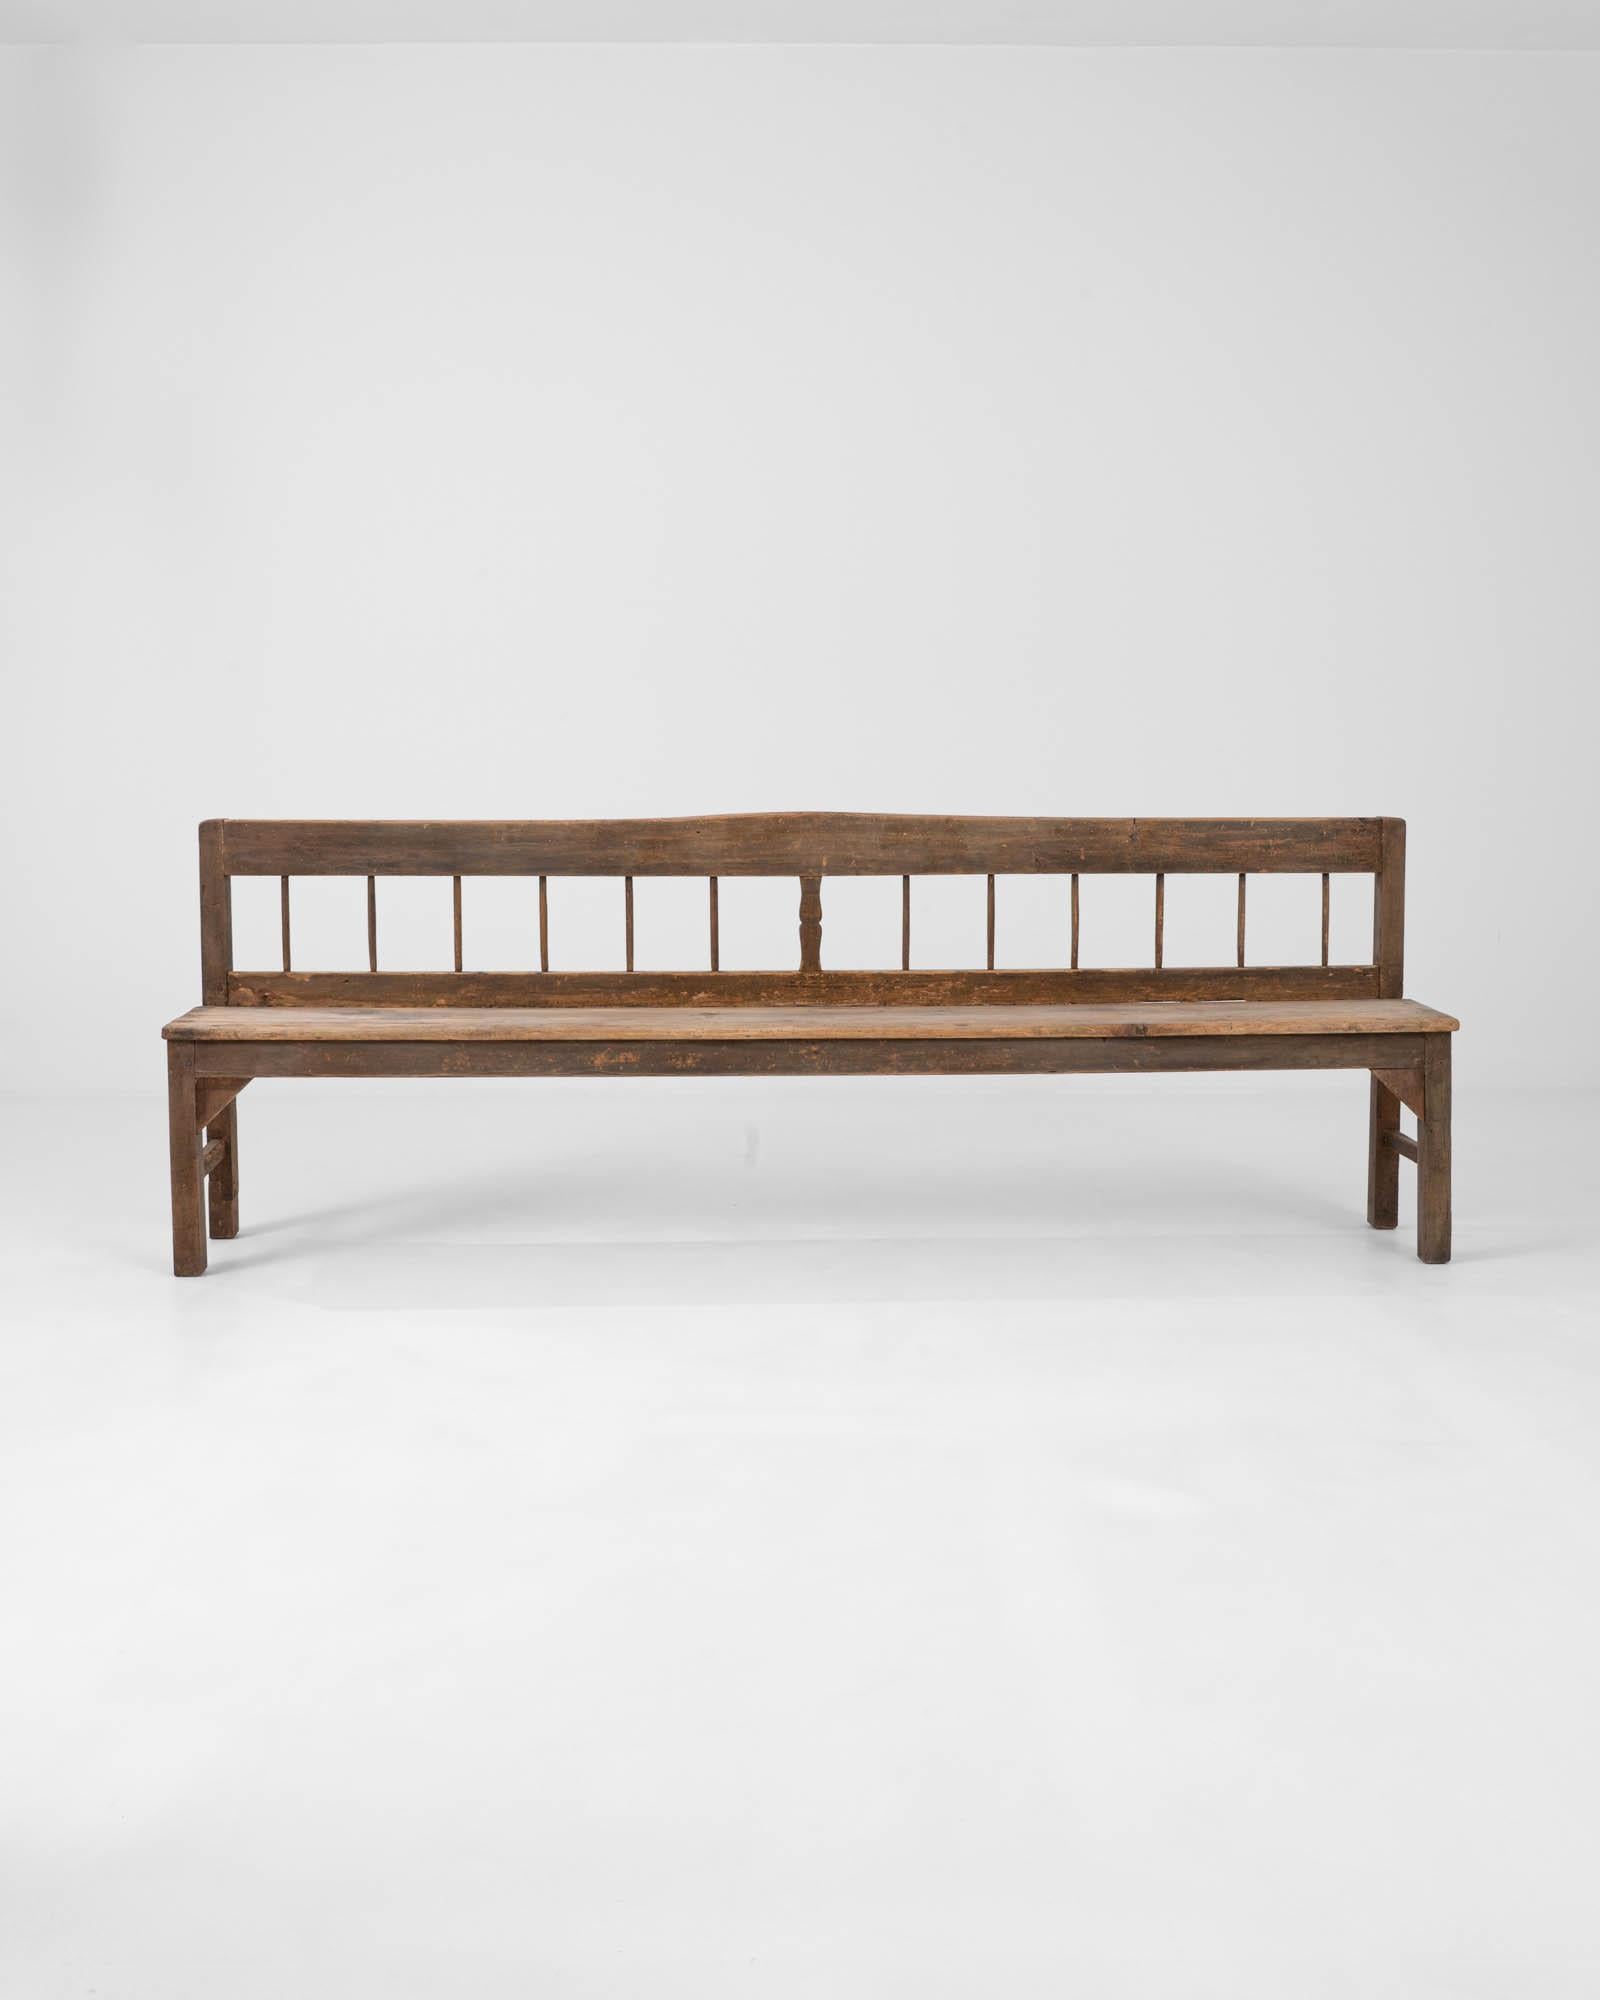 Behold the 1900s Scandinavian Wooden Bench, a piece that embodies the essence of Nordic simplicity and the enduring strength of heritage craftsmanship. This long, solid bench, with its straight lines and unpretentious design, tells a story of many